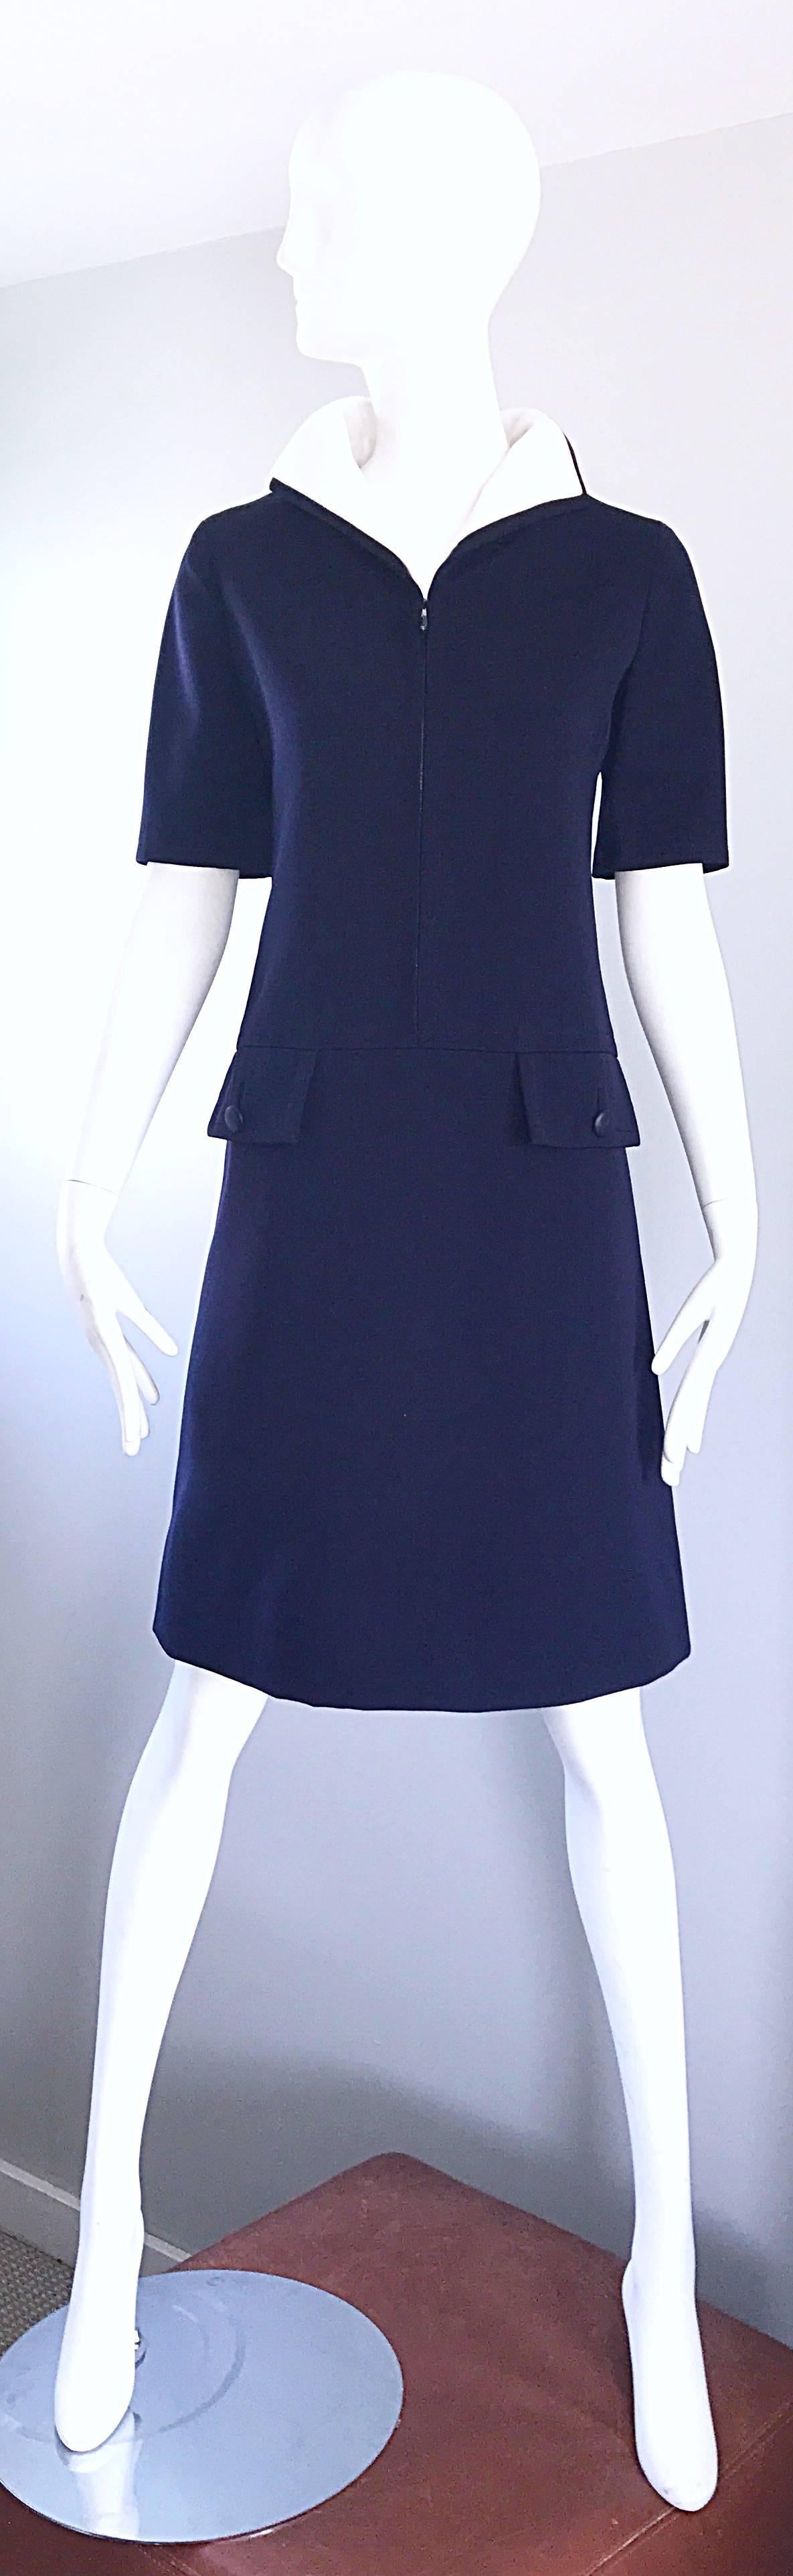 Yves Saint Laurent Haute Couture Navy Blue and White Nautical Dress, 1960s For Sale 1